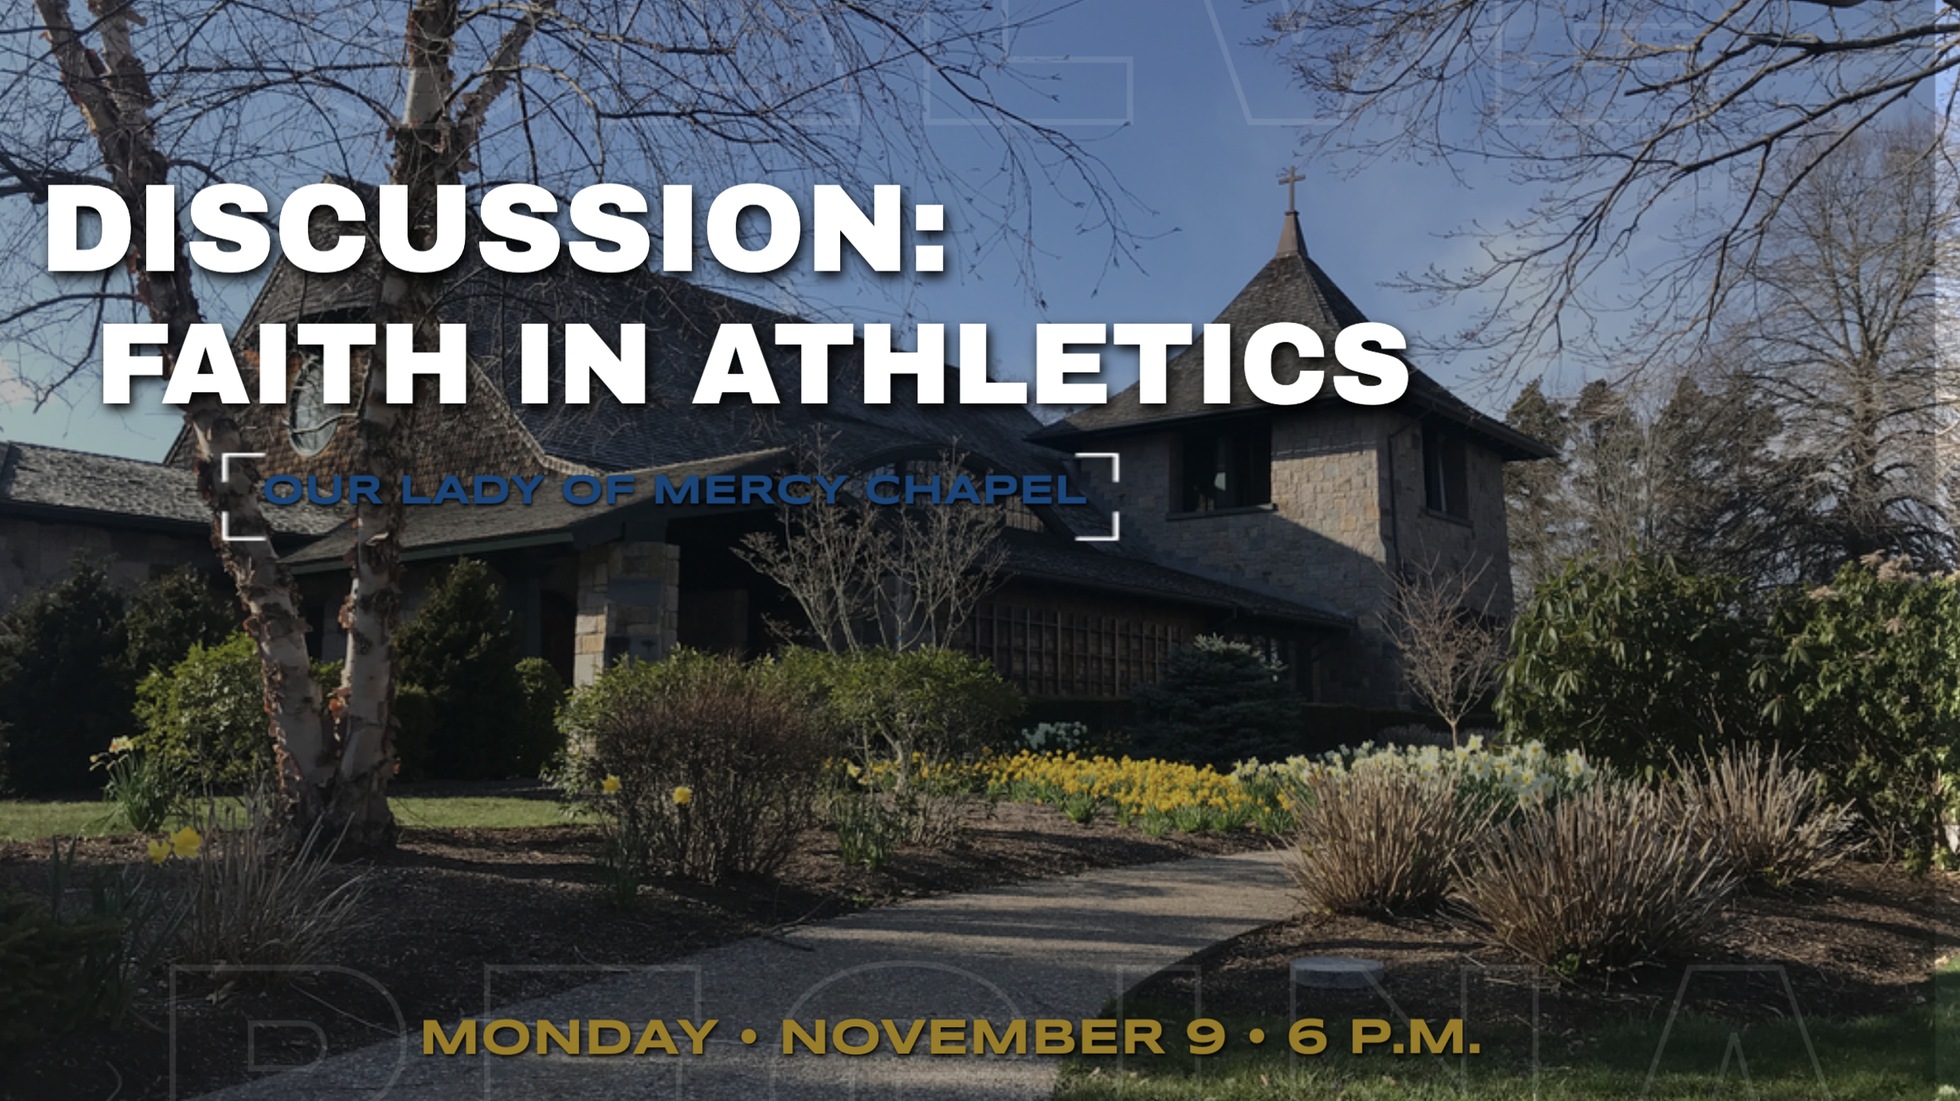 Father Scott Pontes will lead a discussion on faith in athletics.